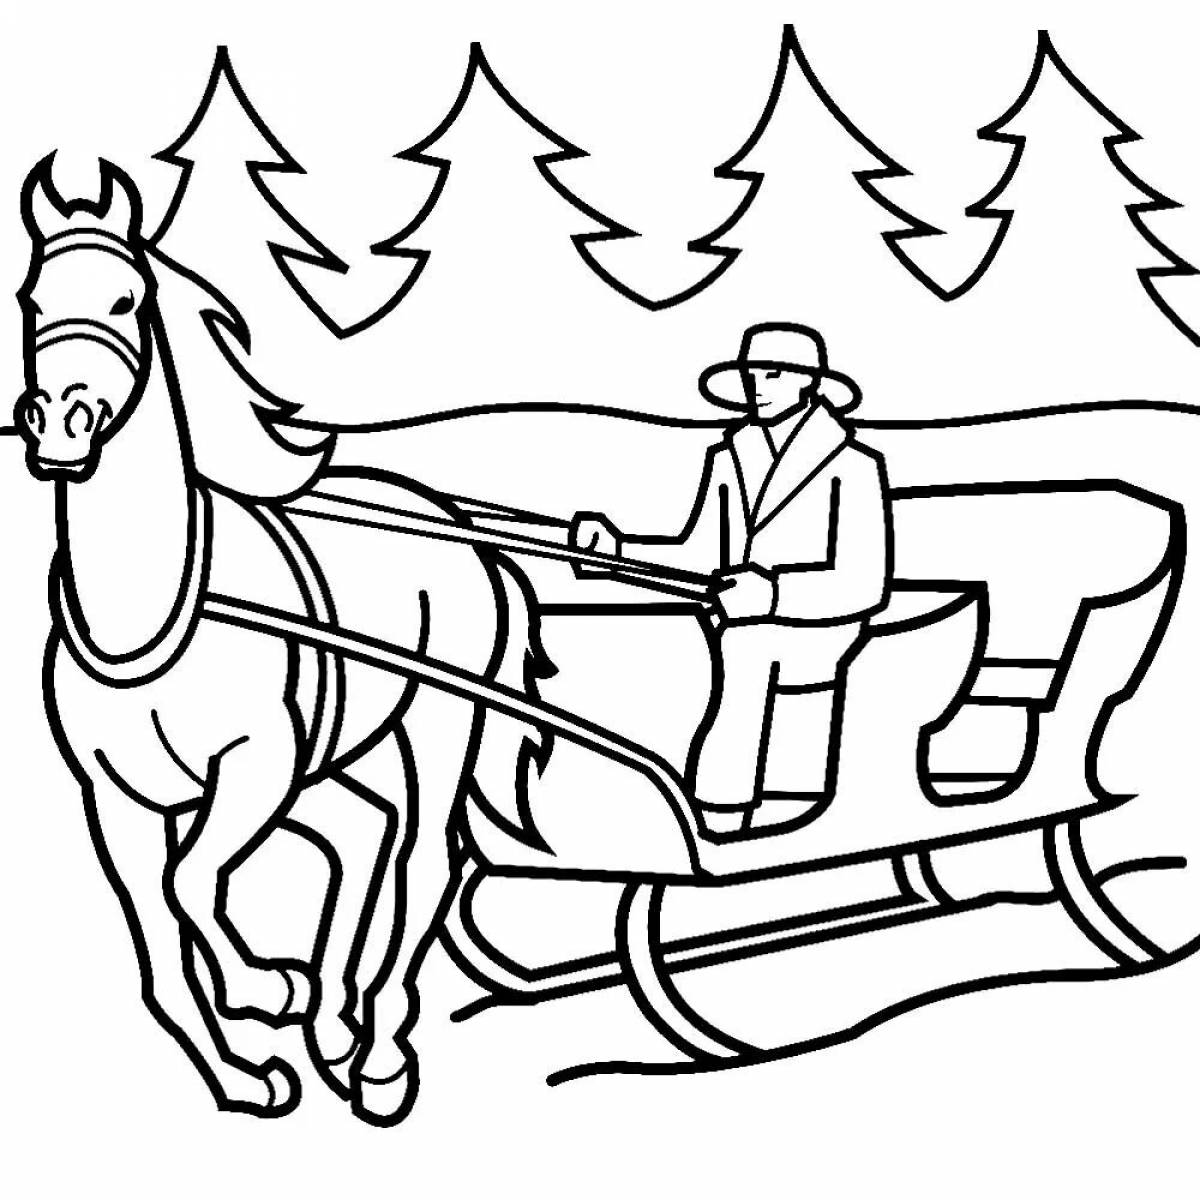 Horse with sleigh #11